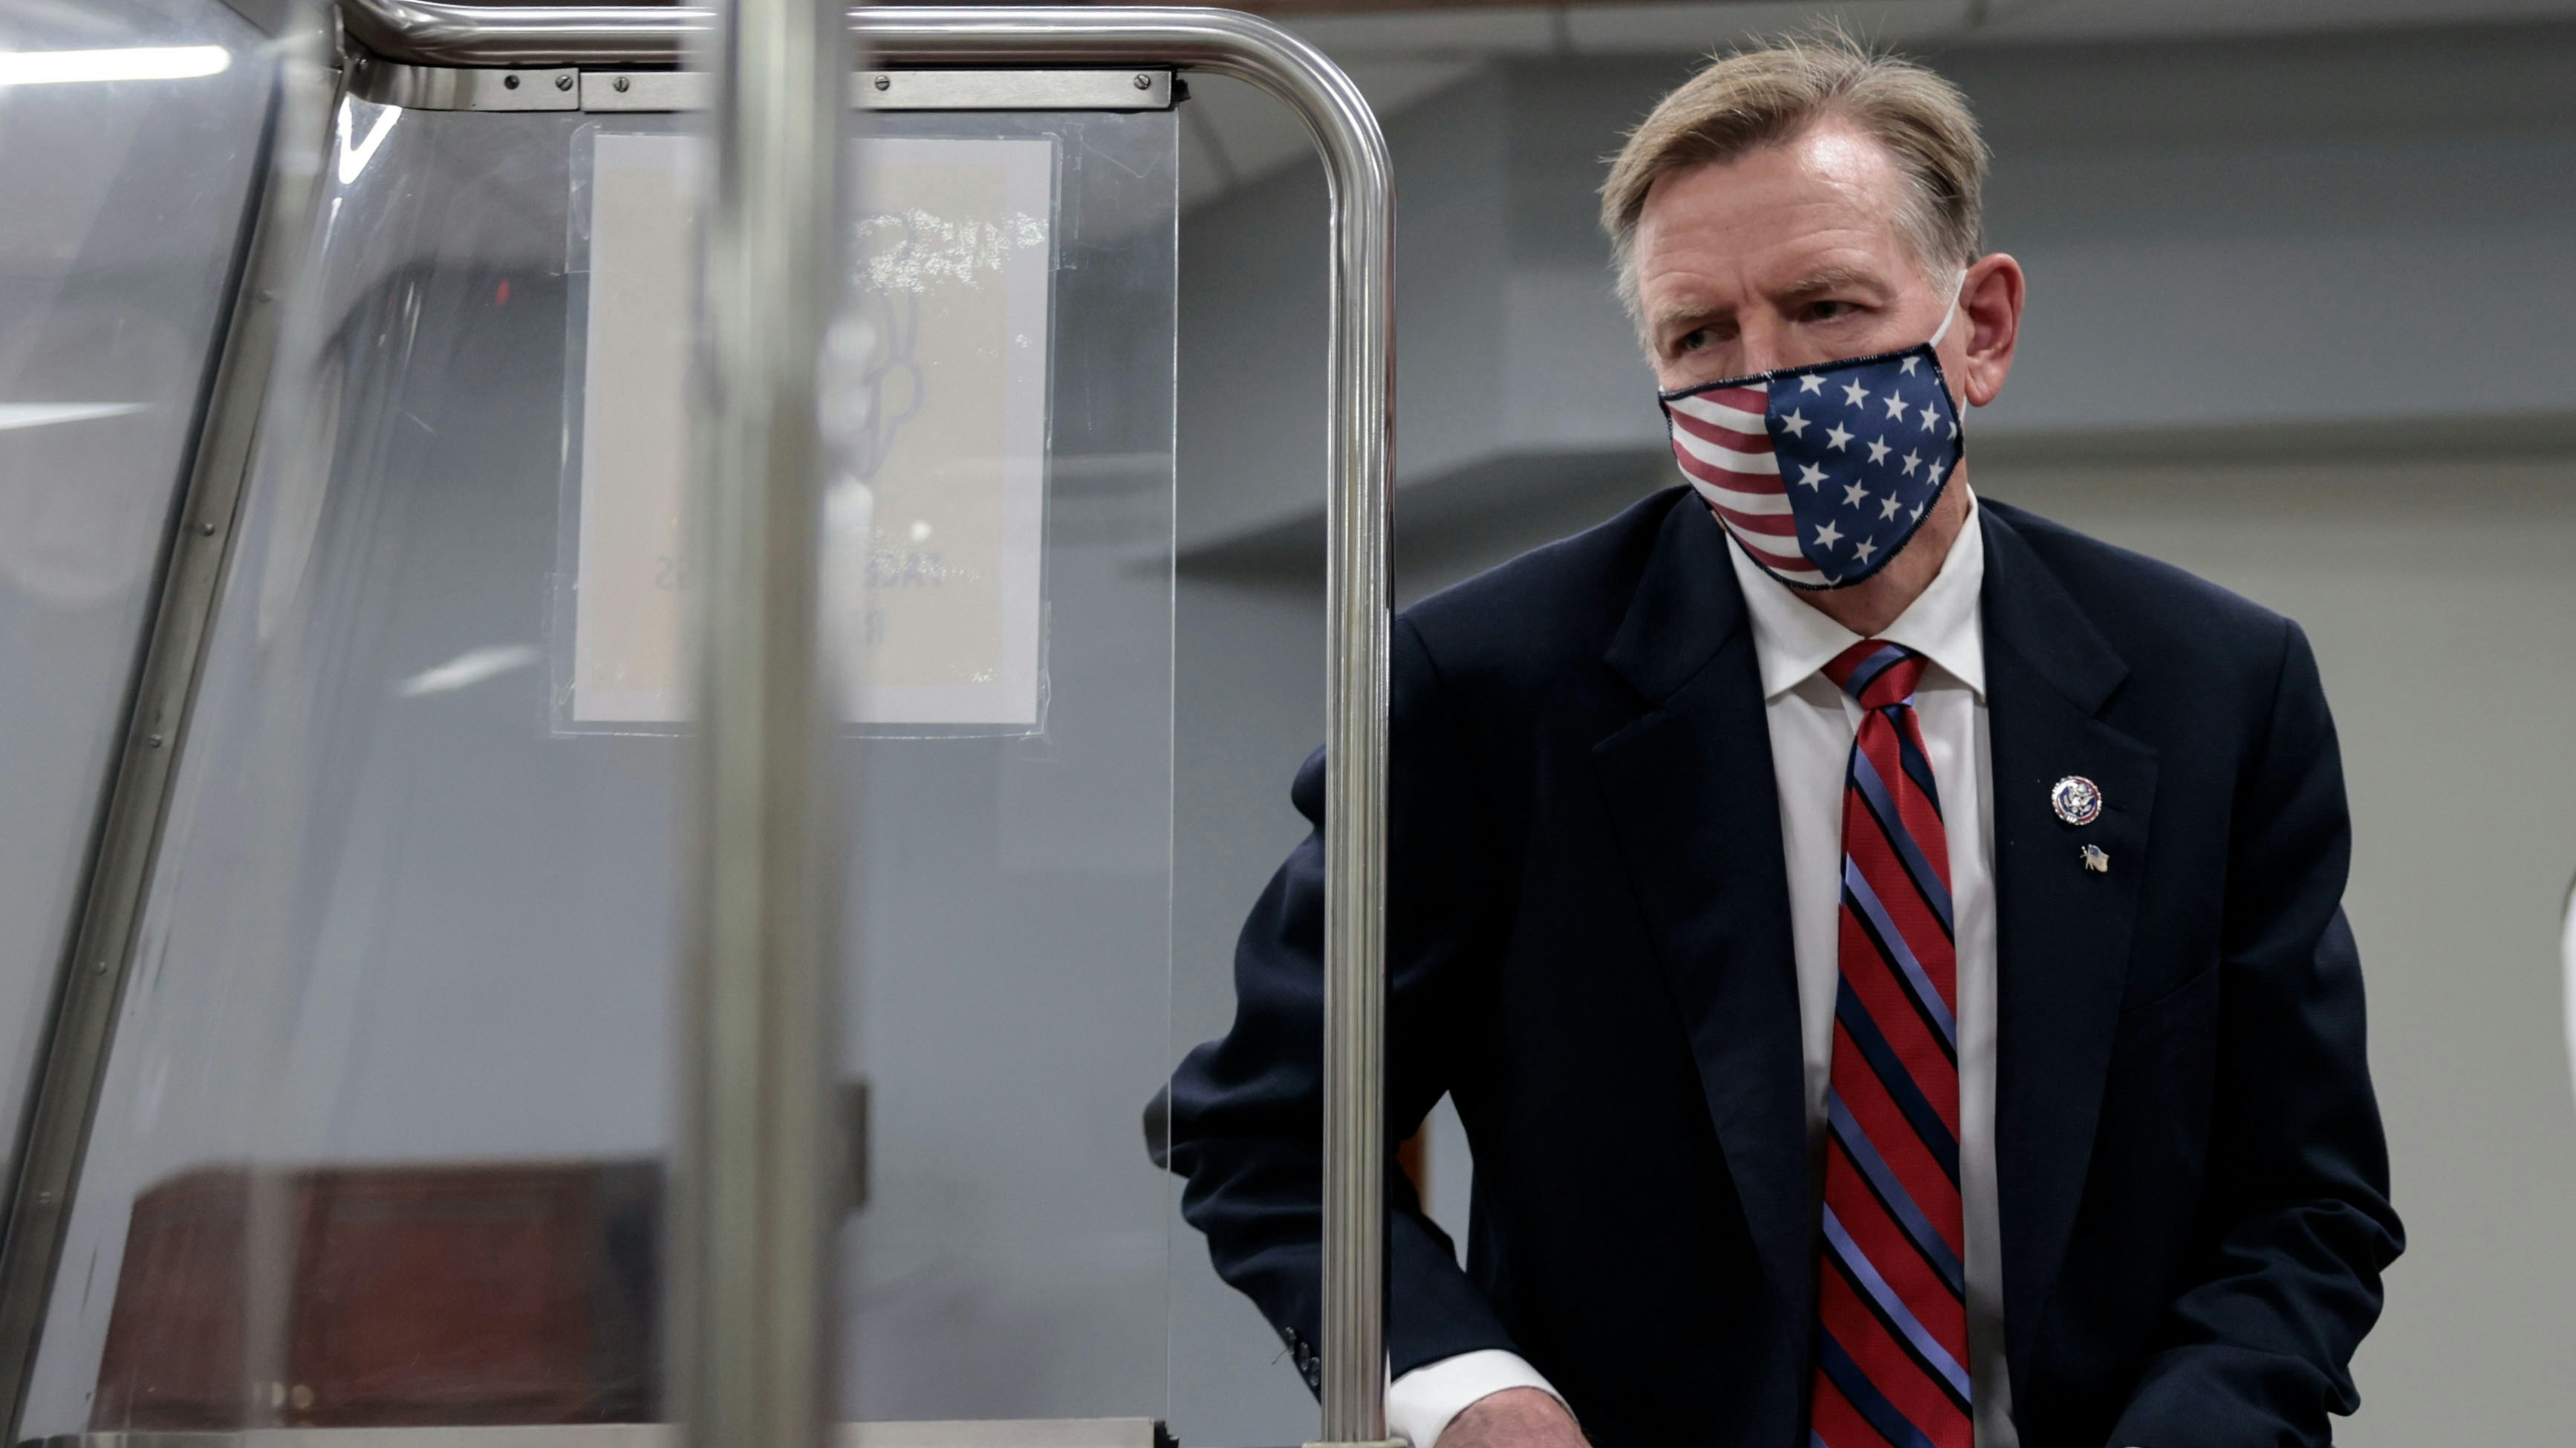 Rep. Paul Gosar (R-AZ) walks on to a subway to the U.S. Capitol Building 